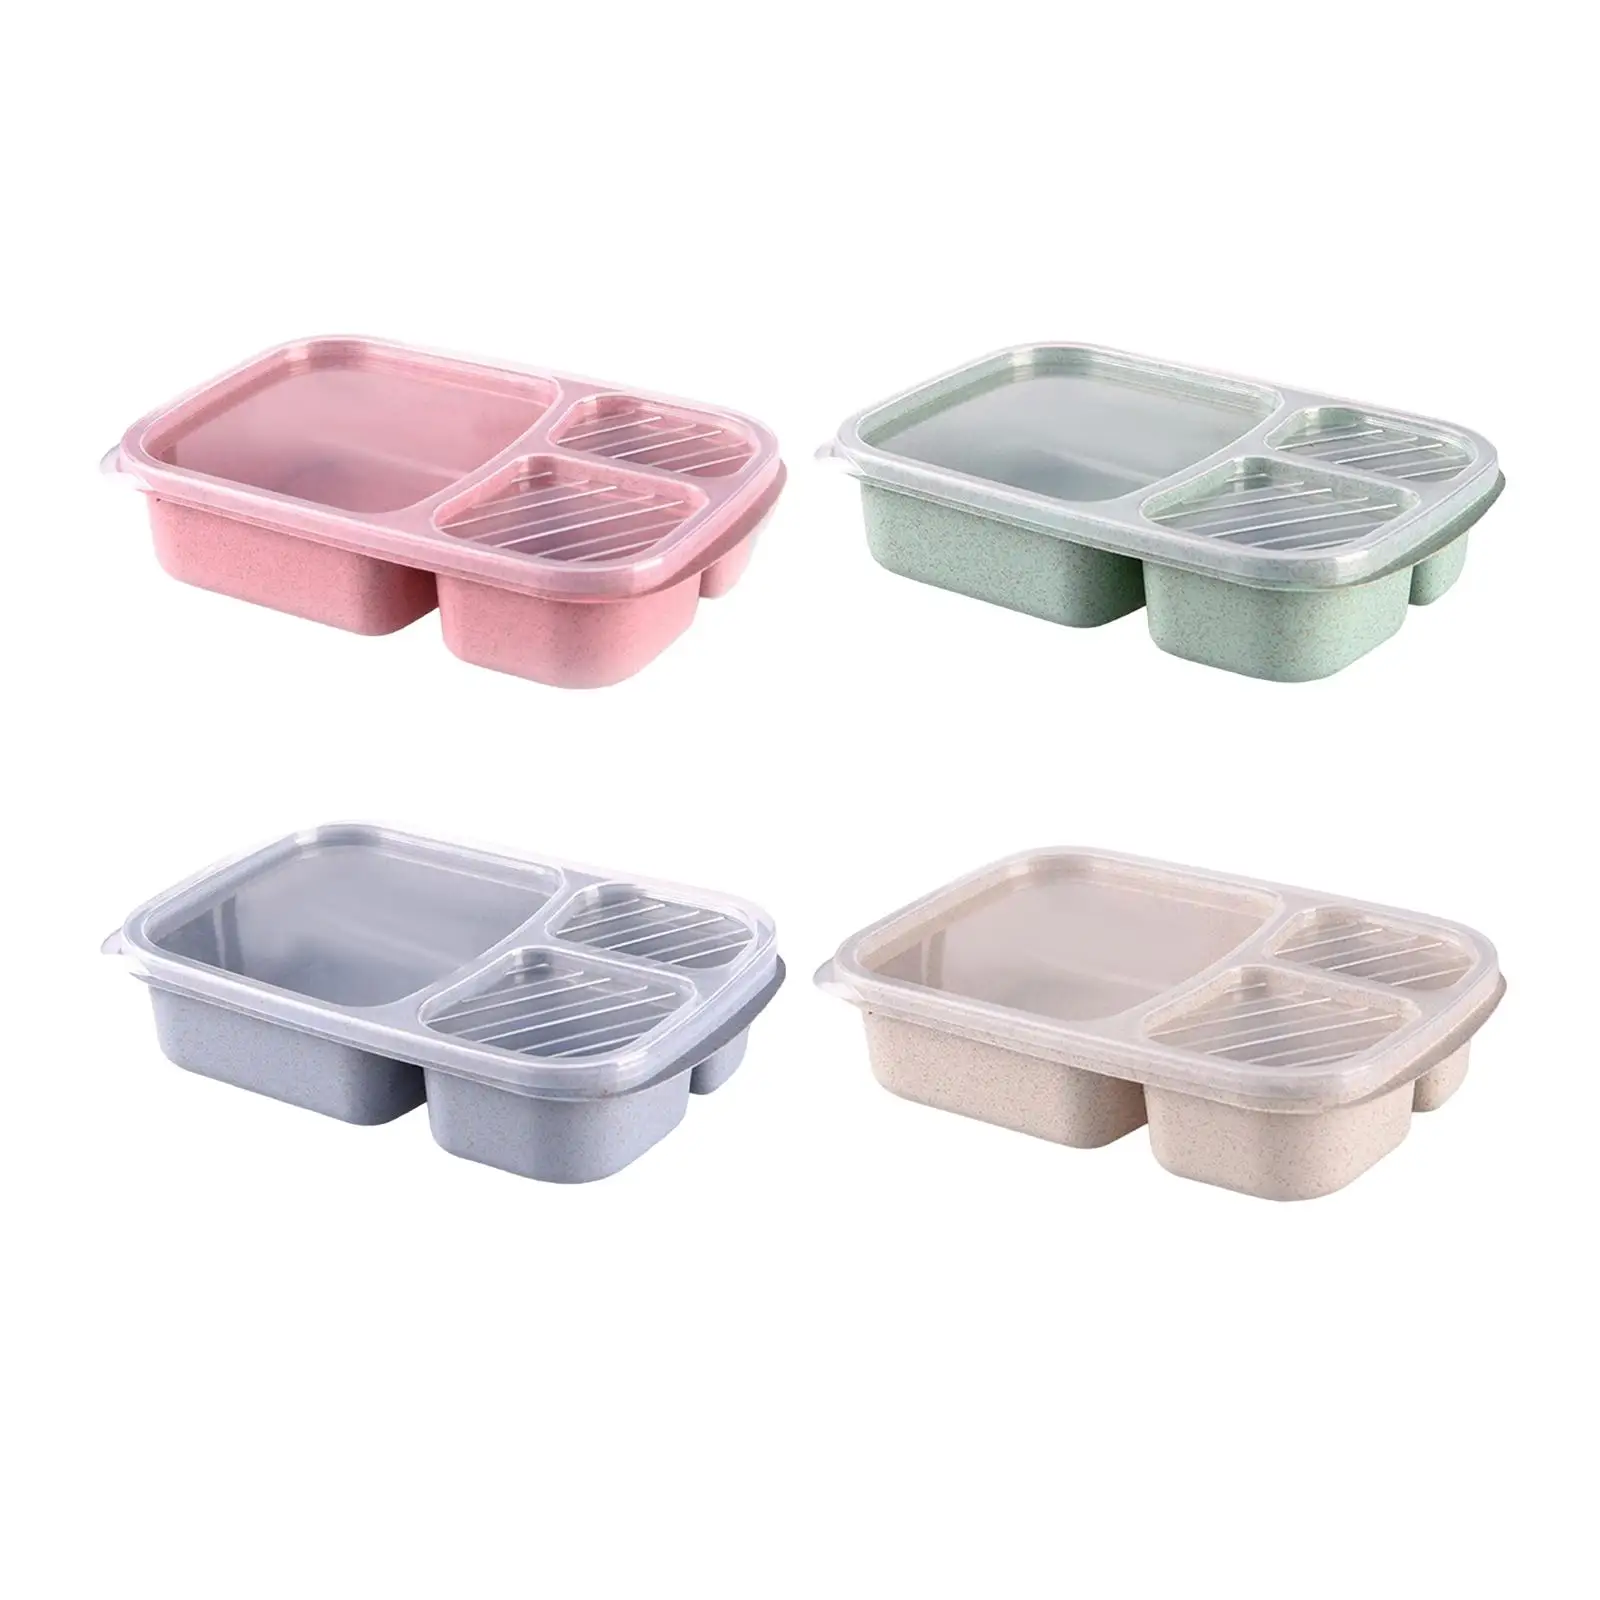 Airtight Microwave Bento Picnic Divided Compartments Leakproof Wheat Fiber PP bento boxes for Children Teen Adults School